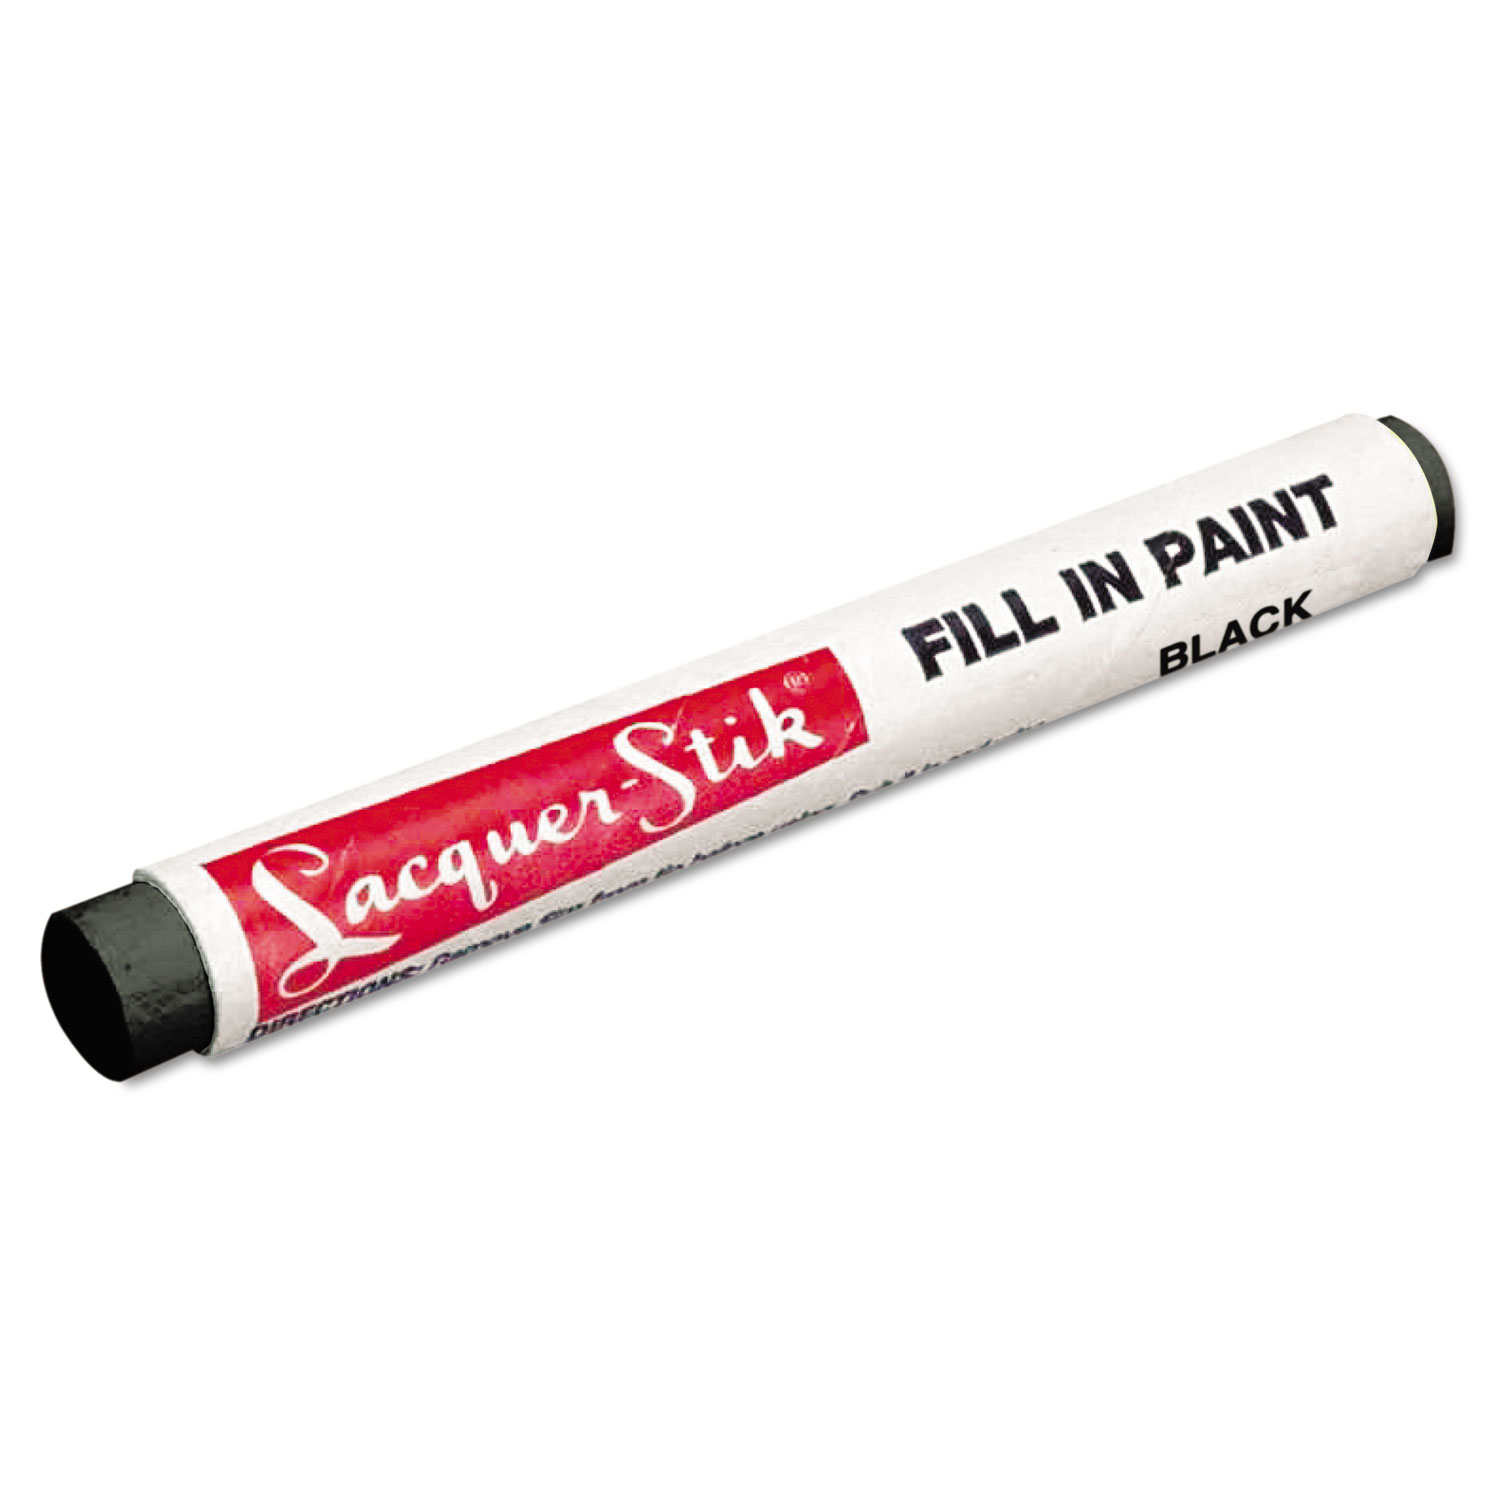 Lacquer-Stik Fill-In Paint Marker, Black